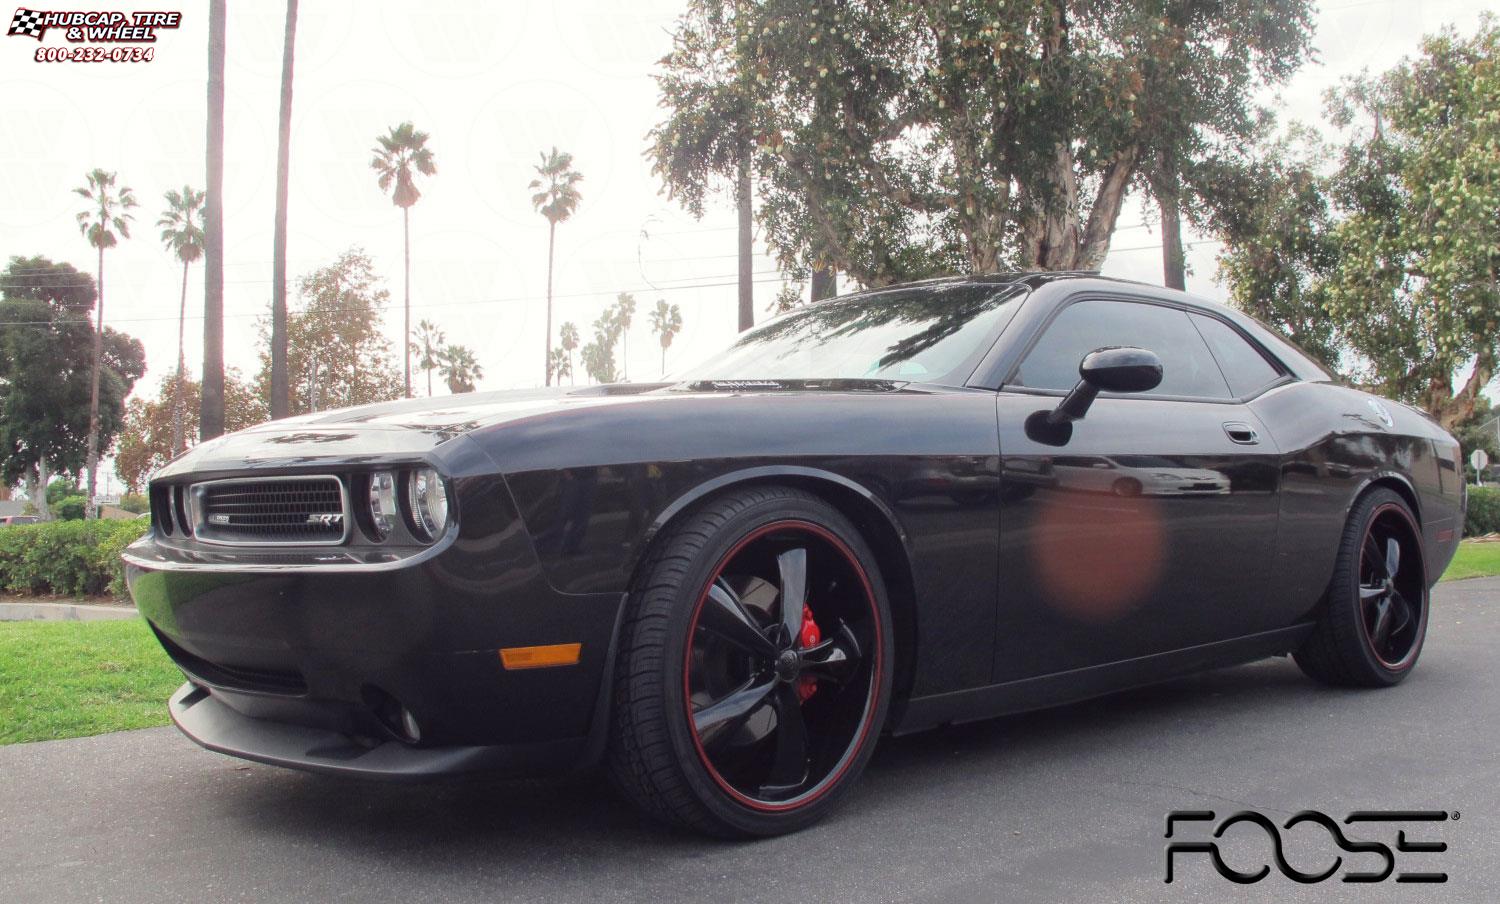 vehicle gallery/2010 dodge challenger srt8 foose legend f104 22X0  Gloss Black with Lip Groove wheels and rims